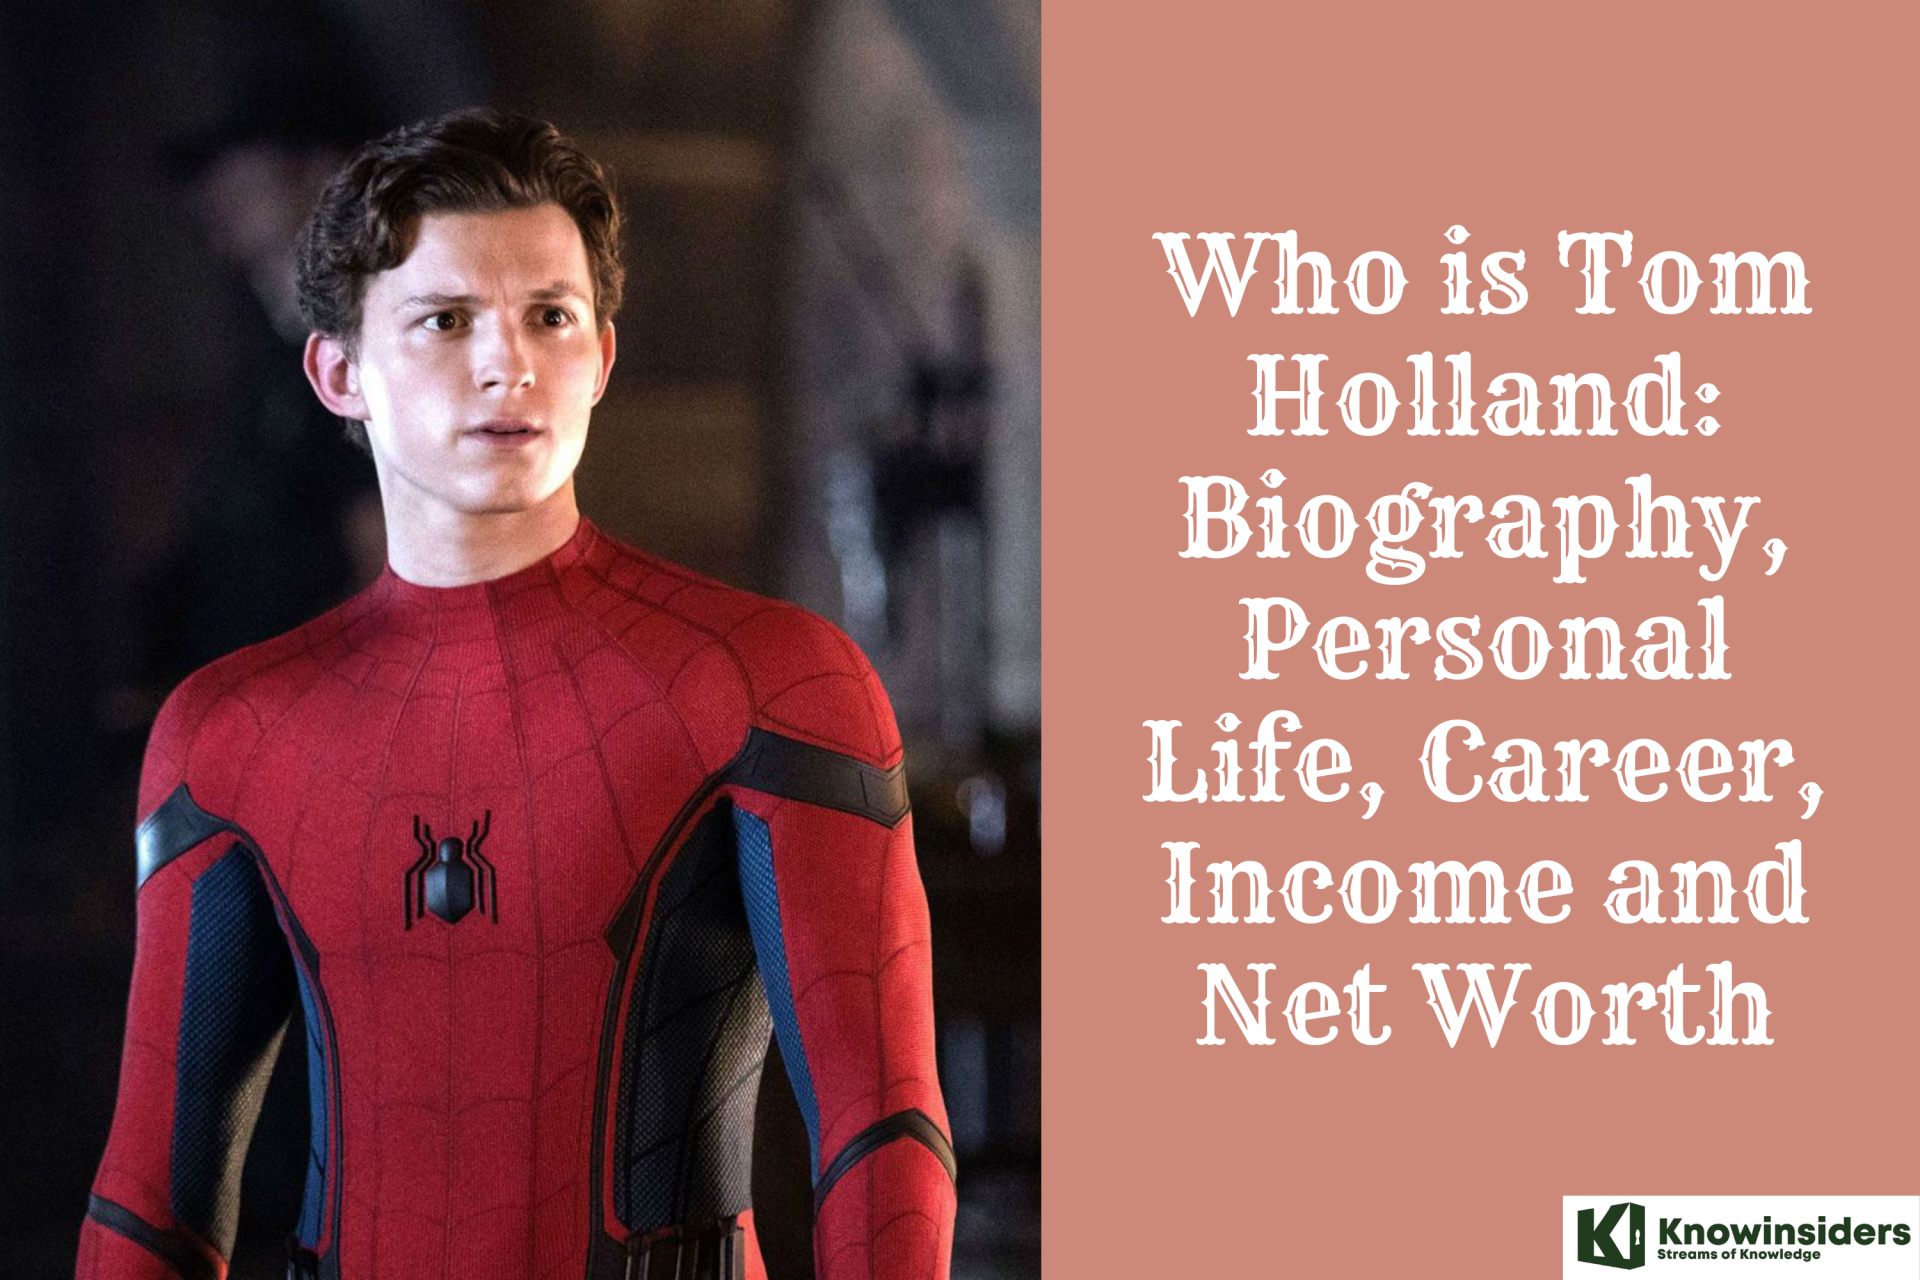 Who is Tom Holland: Biography, Personal Life, Career and Net Worth